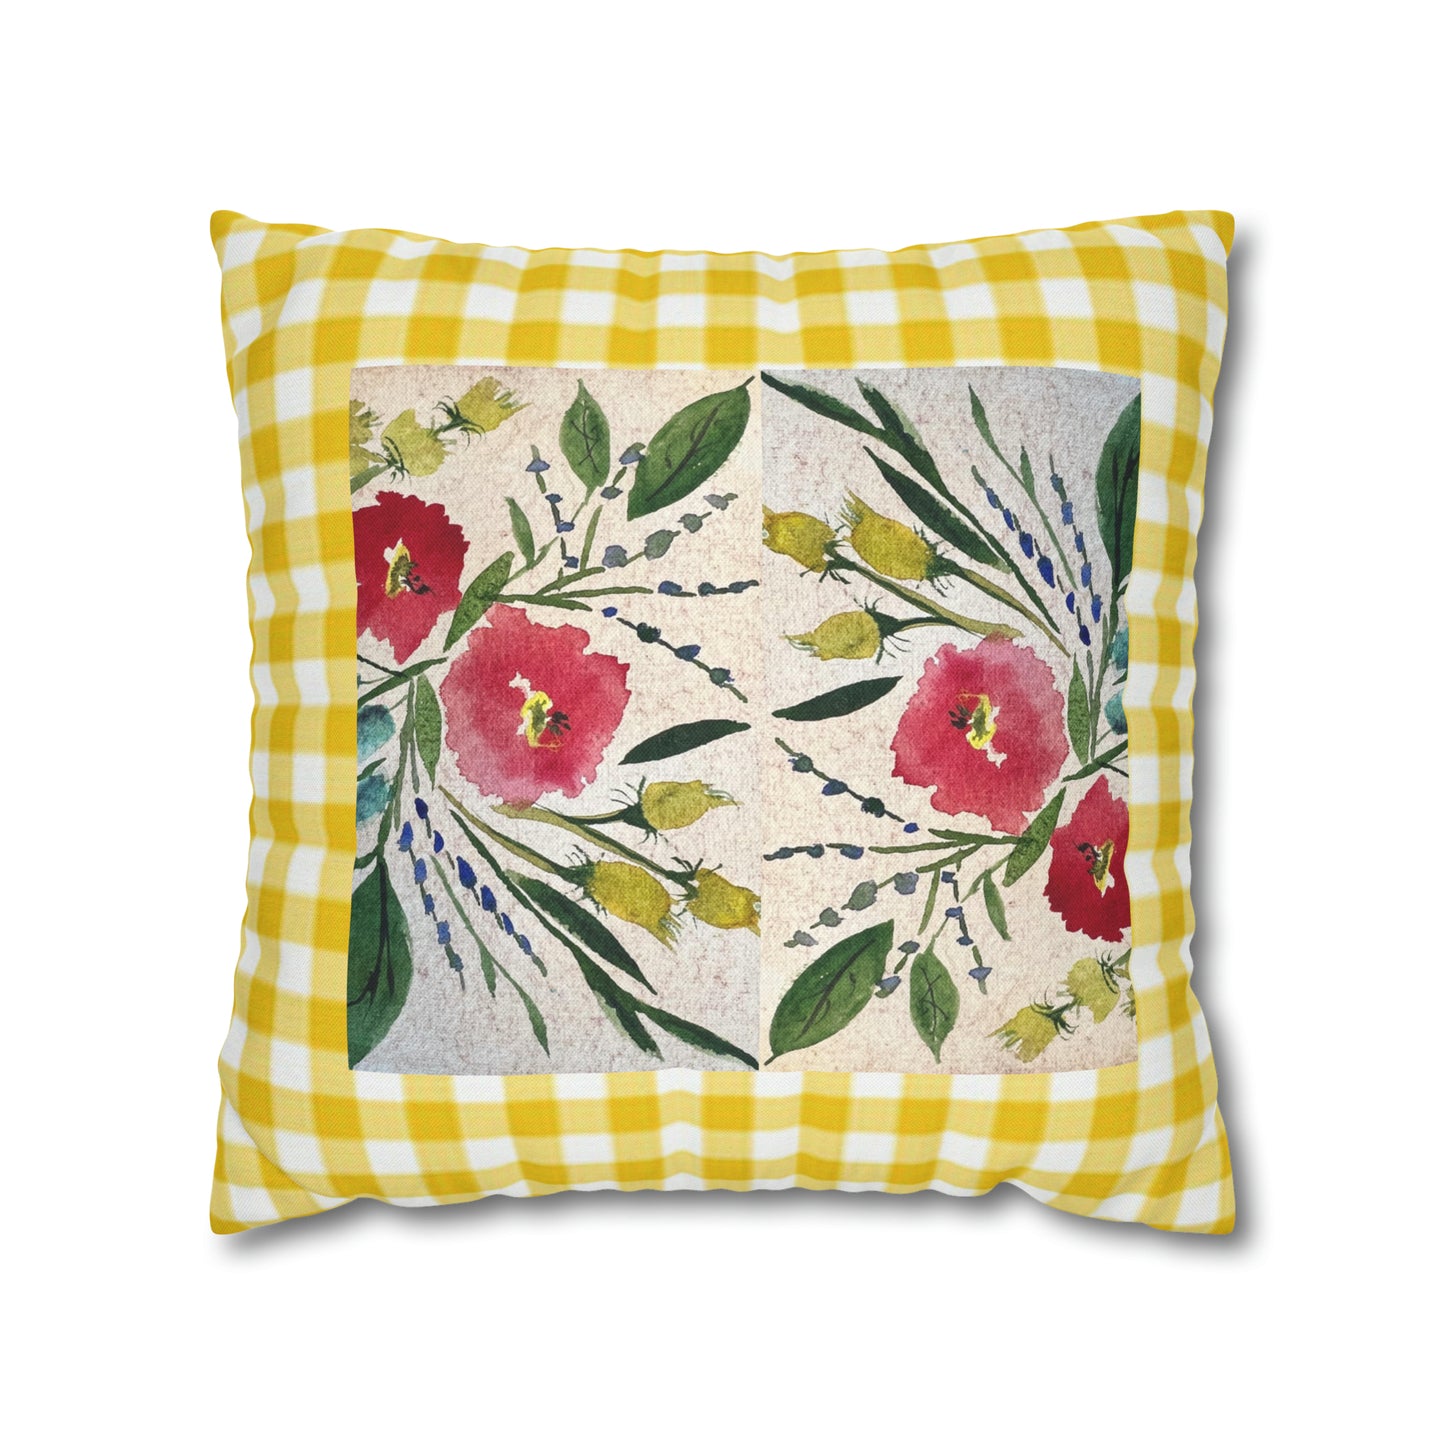 The Cottage Pillow Cover